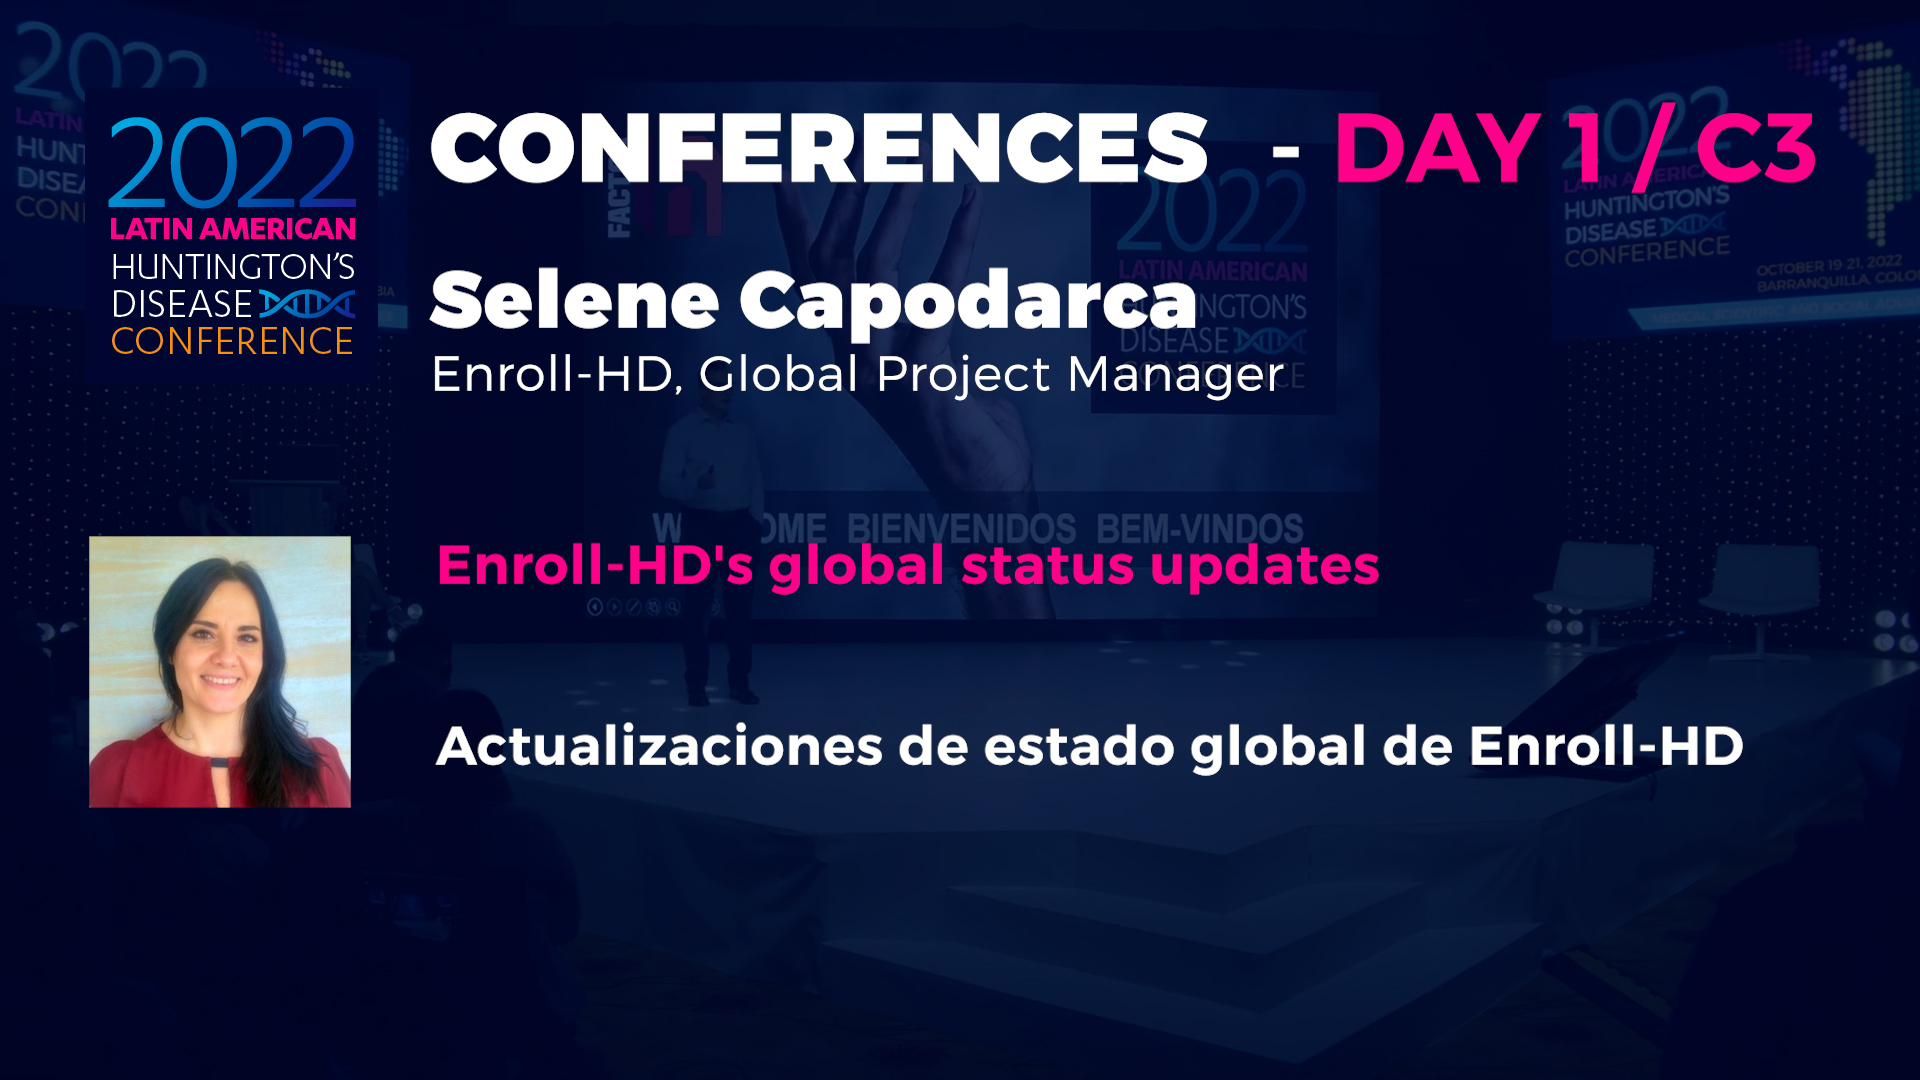 2022HDLatam Conferences Day 1-C3: Selene Capodarca - Global Project Manager for Enroll-HD